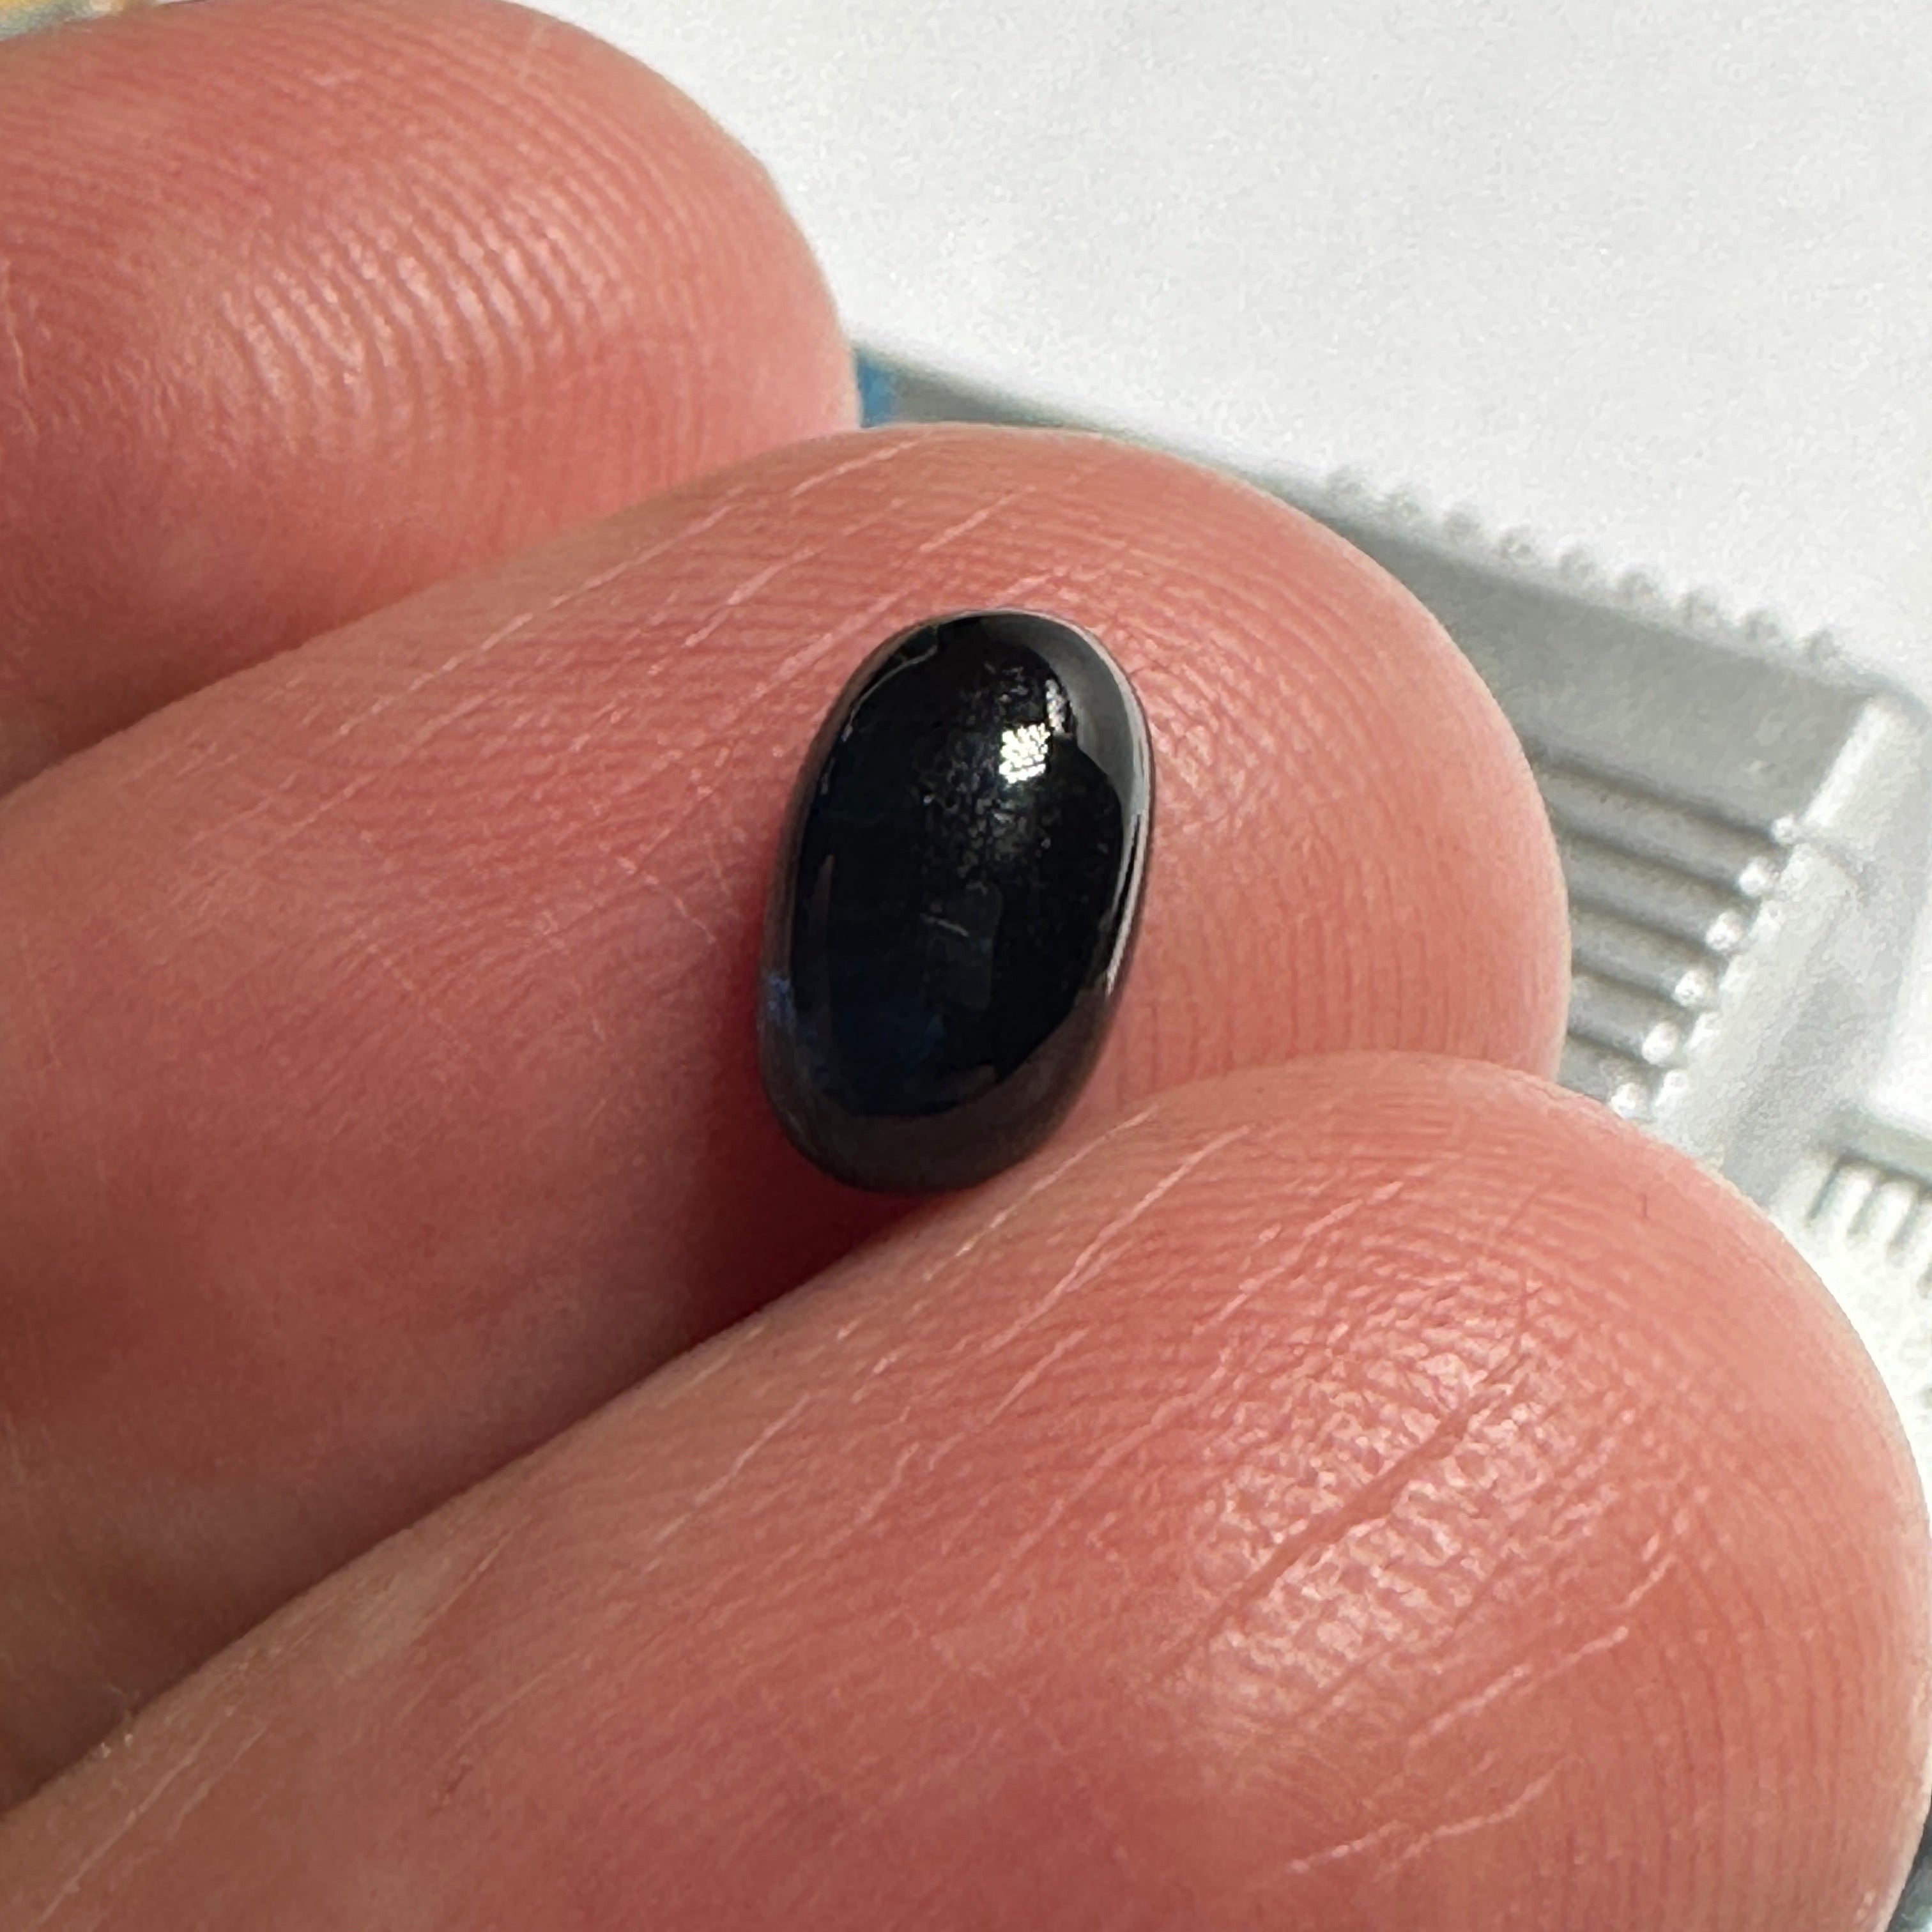 1.80Ct Sapphire Cabochon Kenya. Untreated Unheated. Can Be Used As Is Or Facet It Into A Cut Stone.